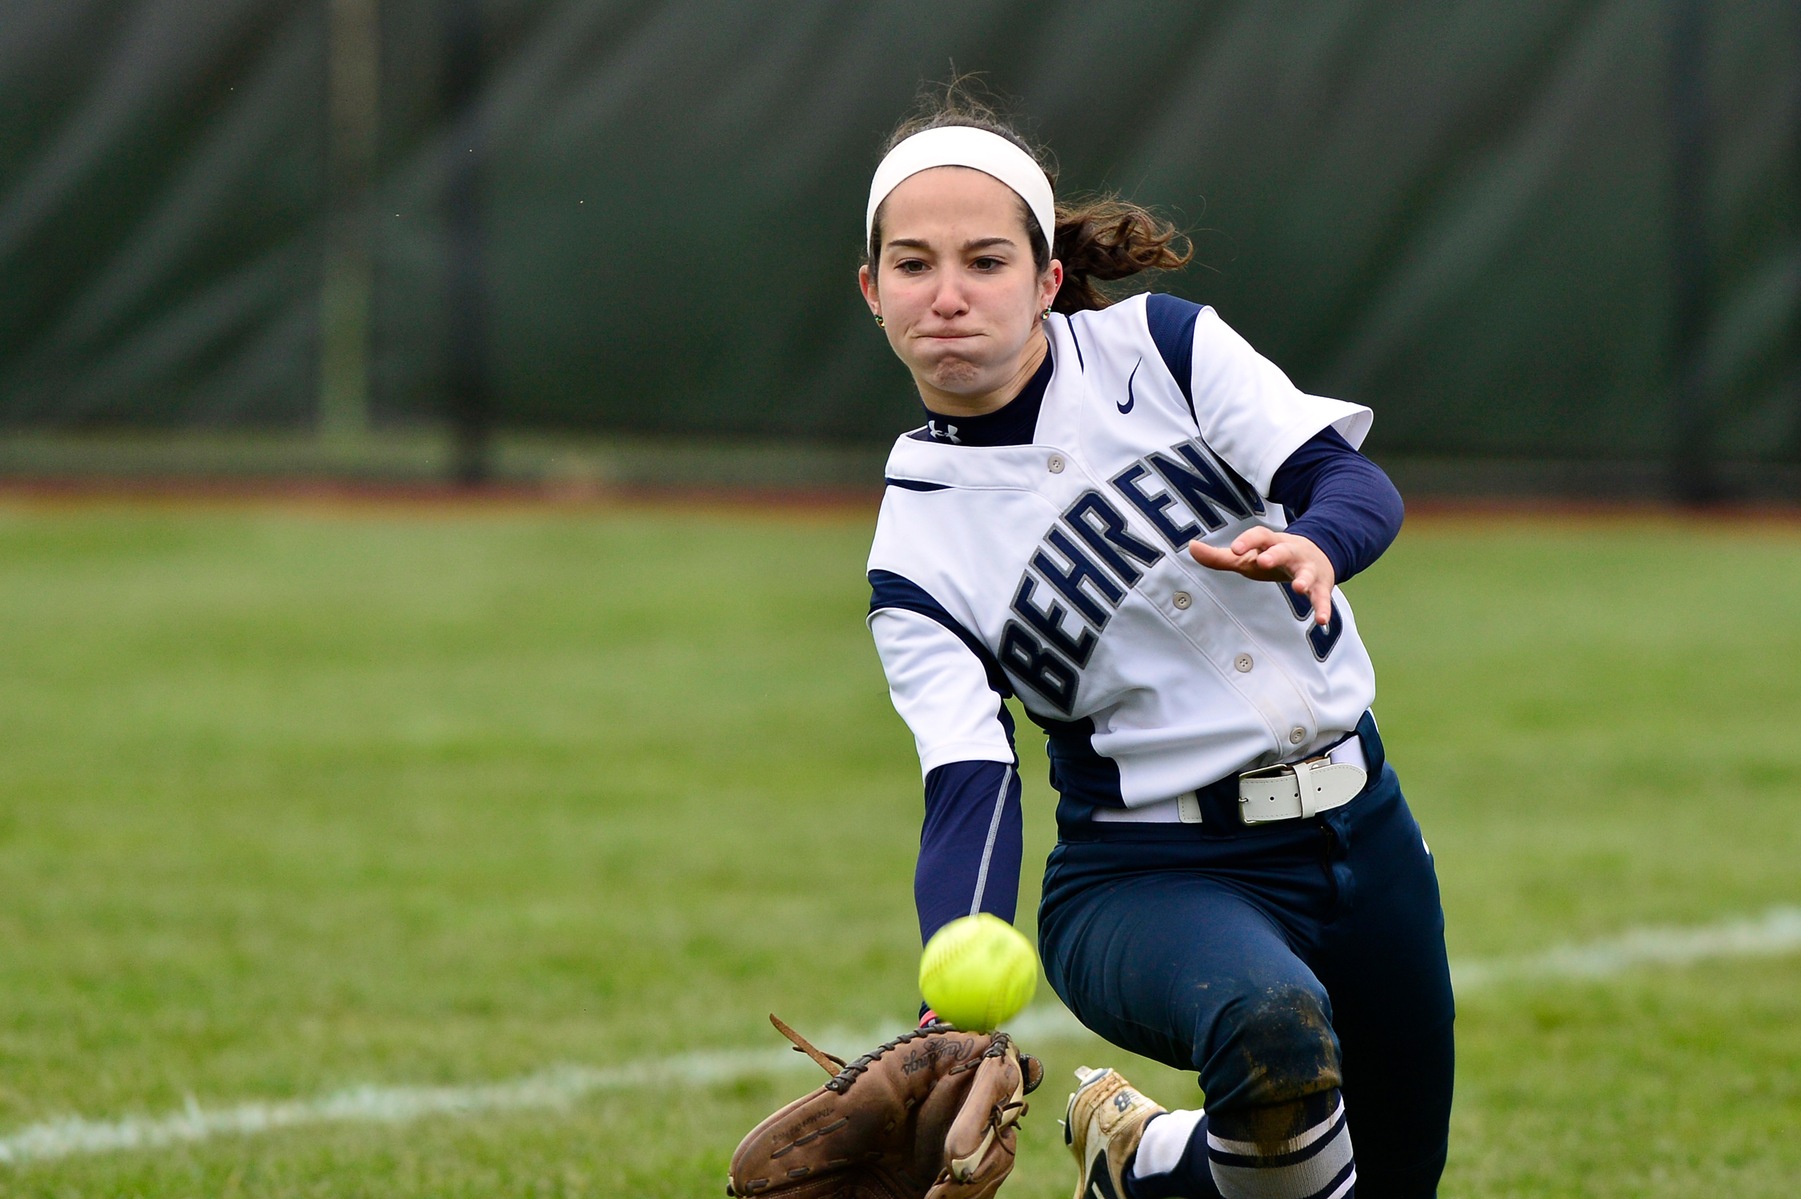 Lions Sweep Mt. Aloysius; Hauser Gets 100th Hit